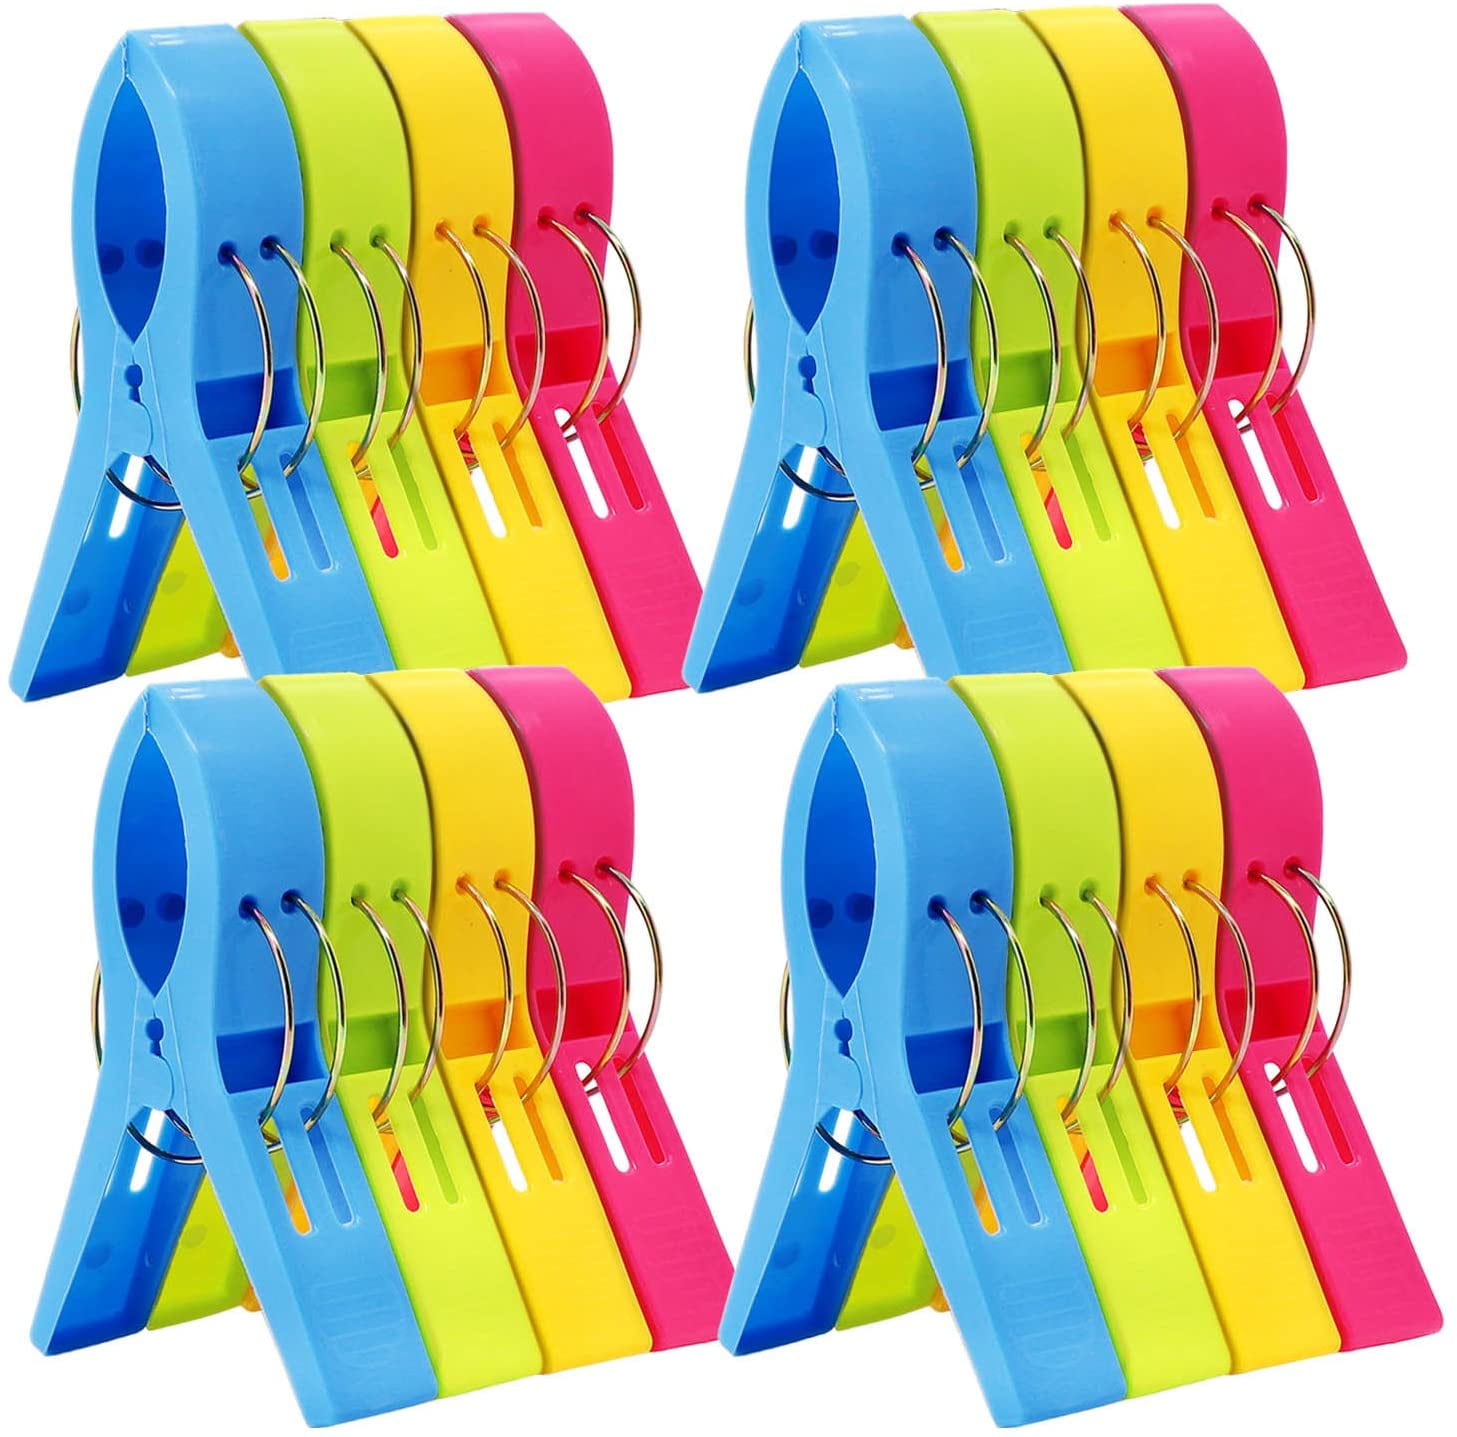 72pcs Plastic Strong Soft Grip Clothespins with Spring Colorful Beach Towel Clips Clamps Hold Socks Jeans Sheets for Sunbeds Washing Line Color ETSAMOR Clothes Laundry Pegs